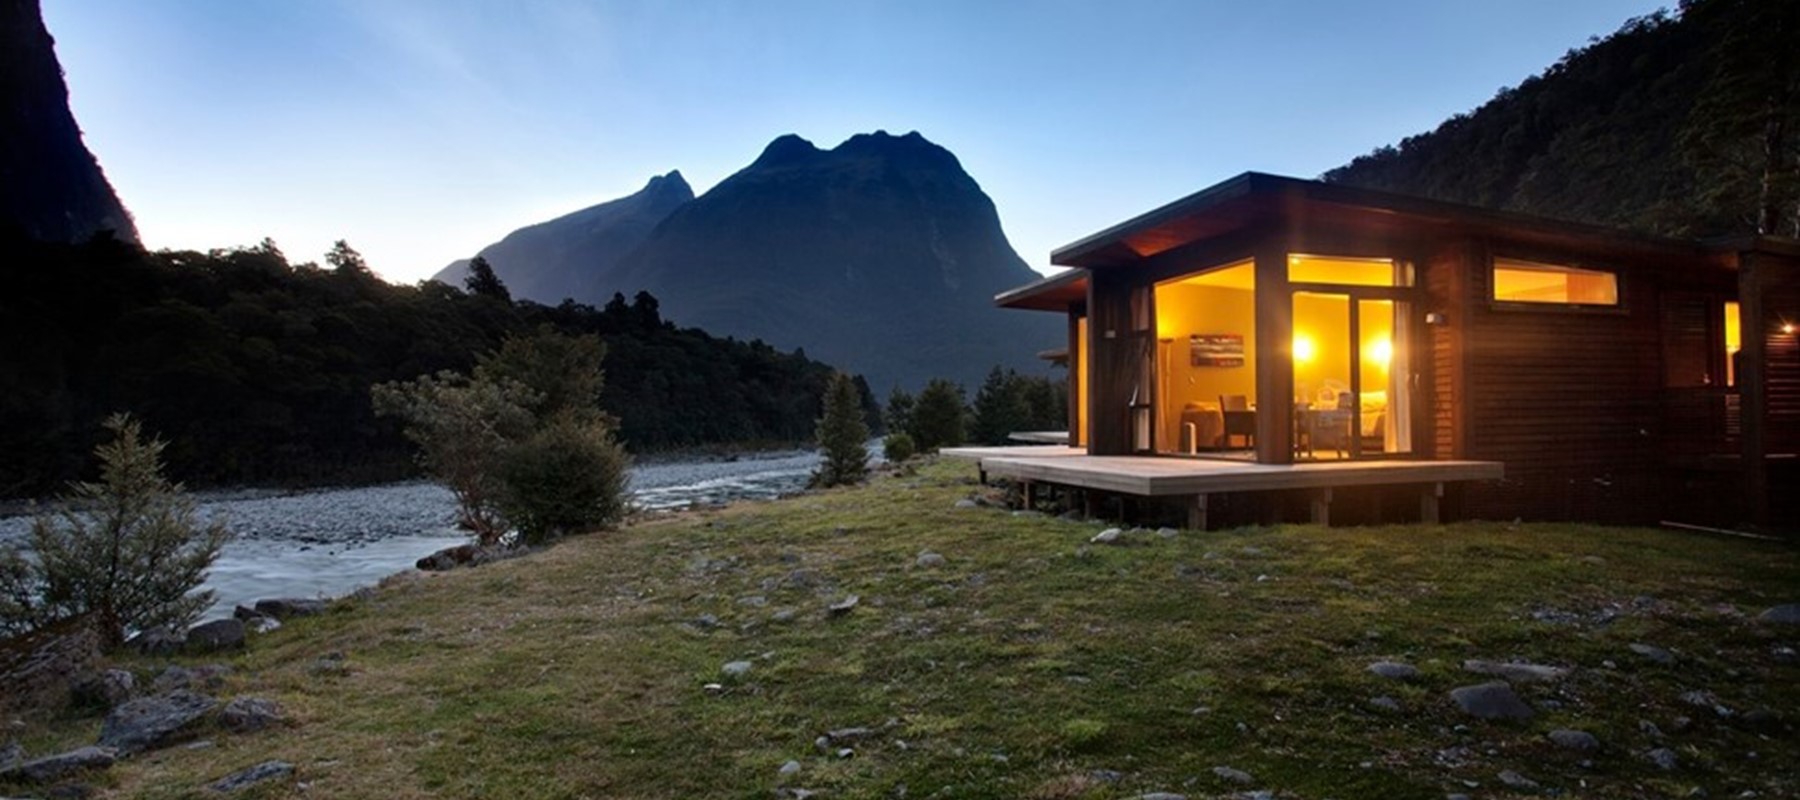 Milford Sound lodge at sunset 